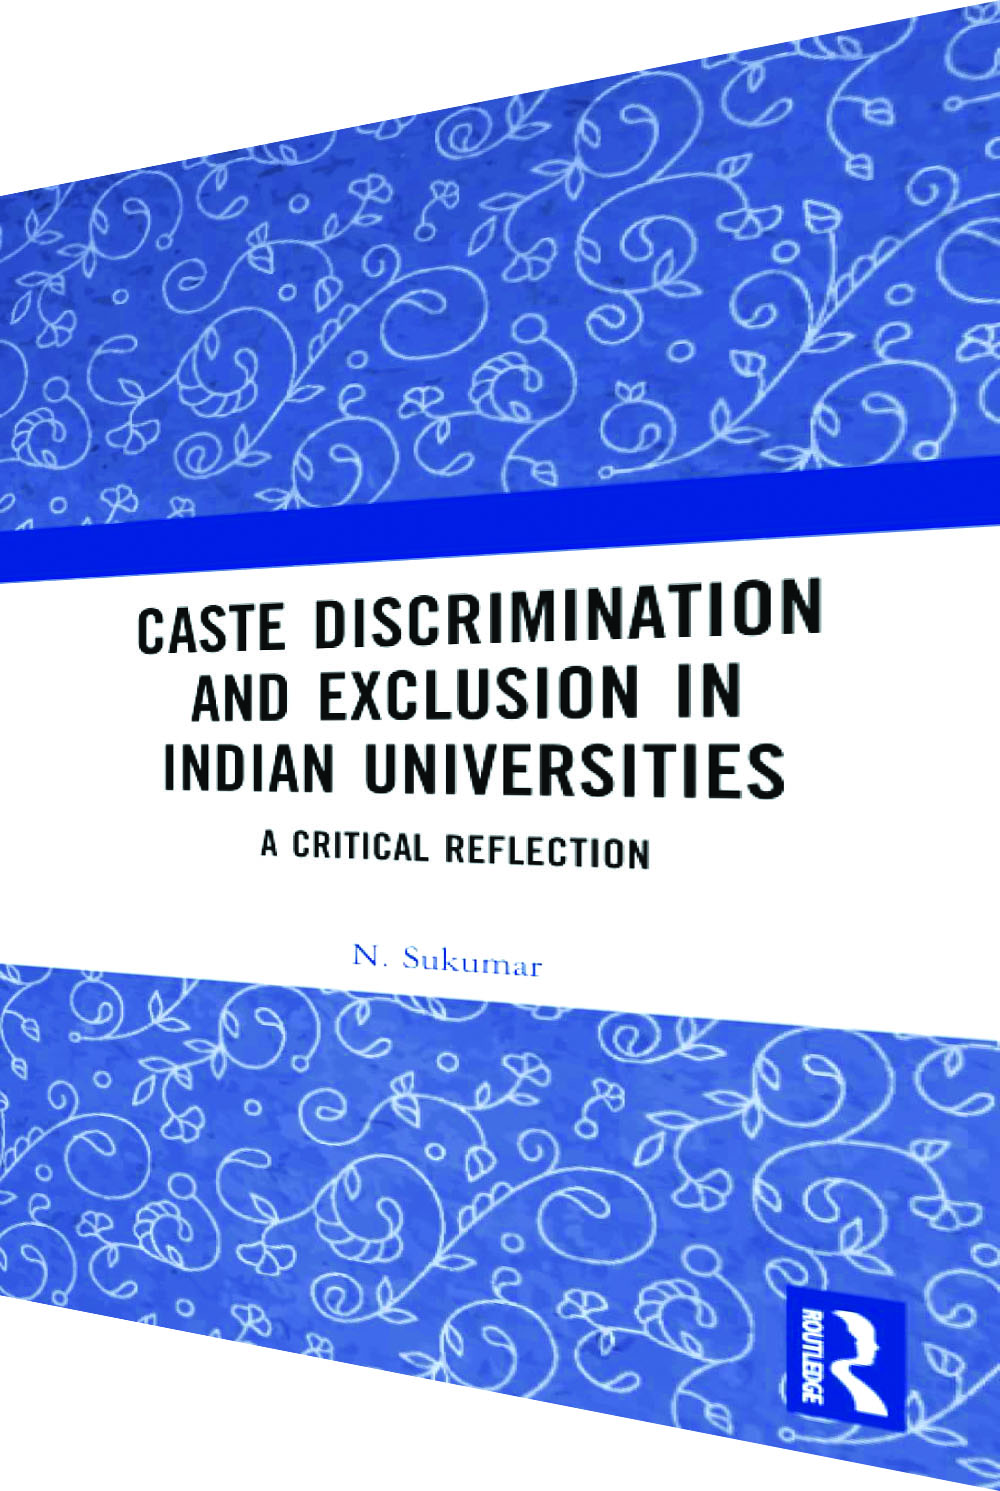 caste discrimination and exclusion in indian universities: a critical reflection